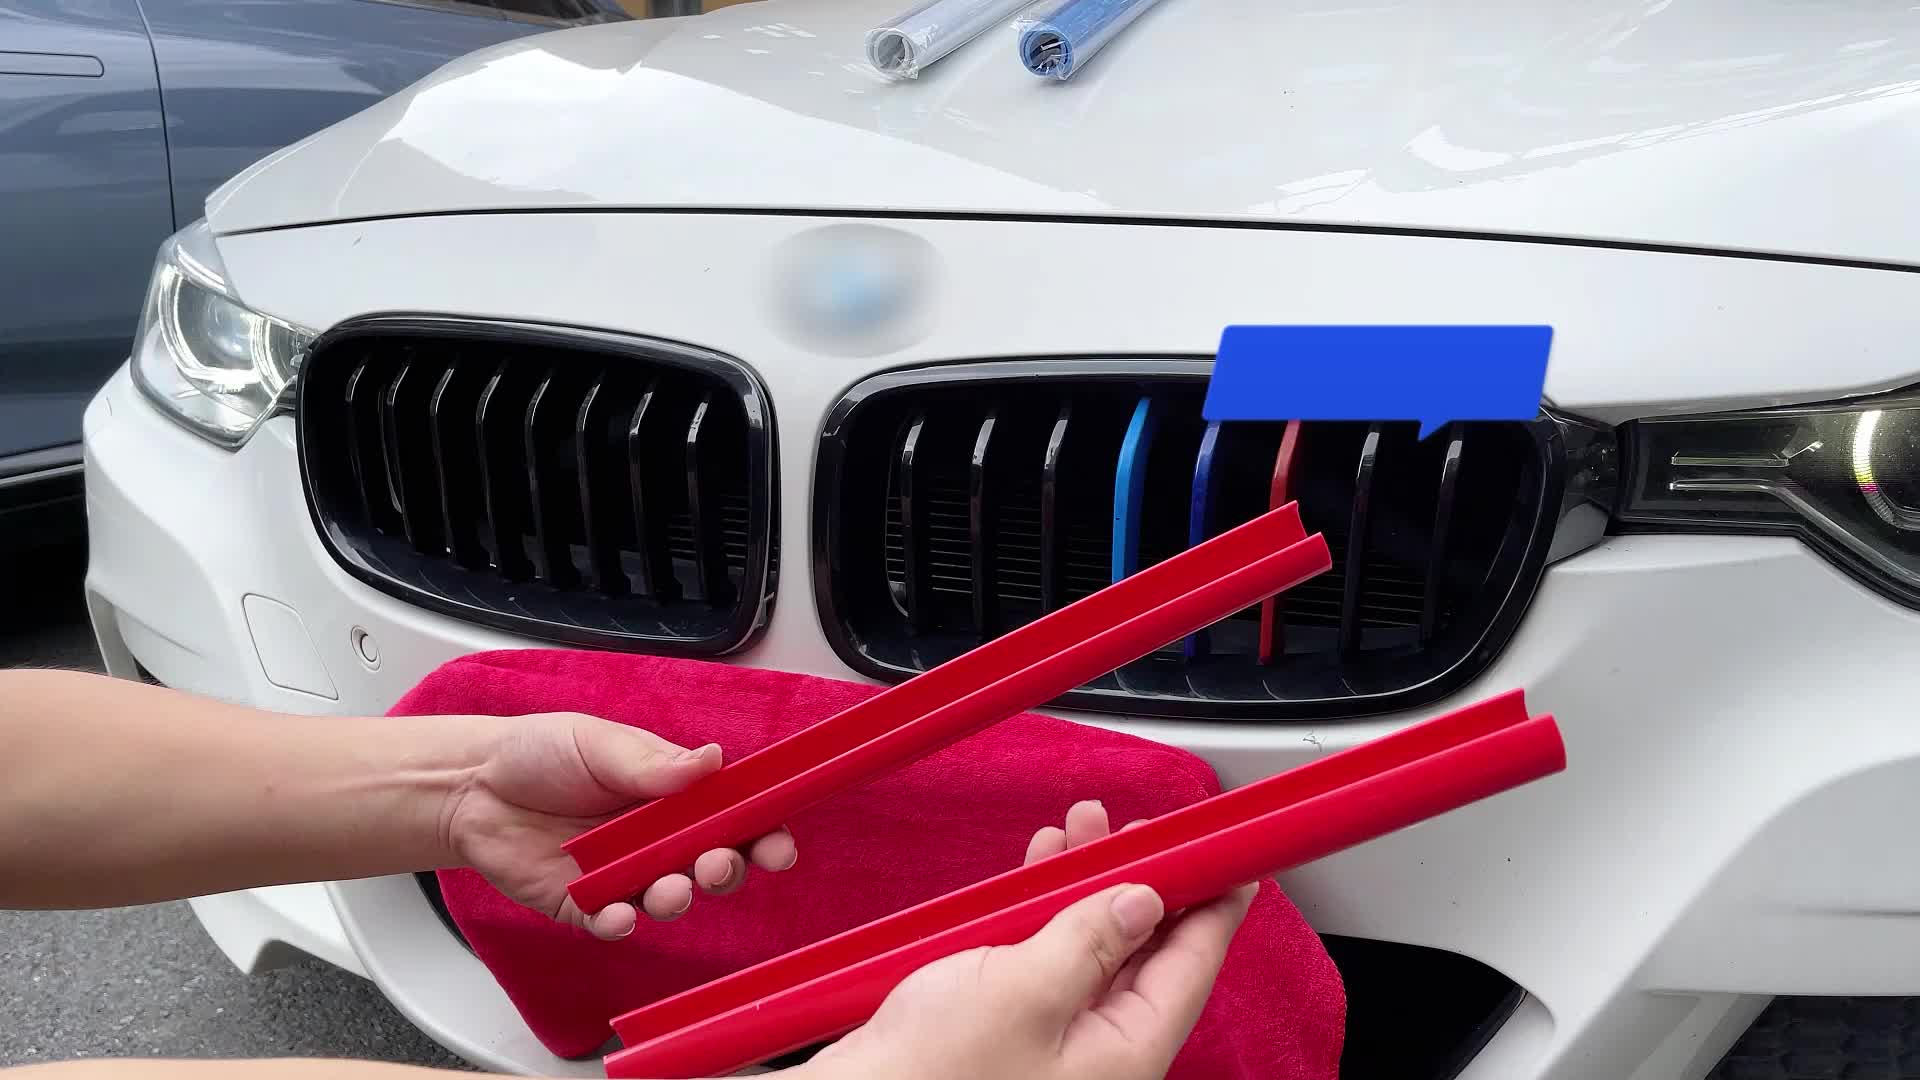 2pcs Red Front Kidney Grille Cover Frame Trim Strips For BMW F20 F21 F22  F23 F30 F31 F32 F33 F44 F45 1 2 3 4 Series M Sport Style Sticker